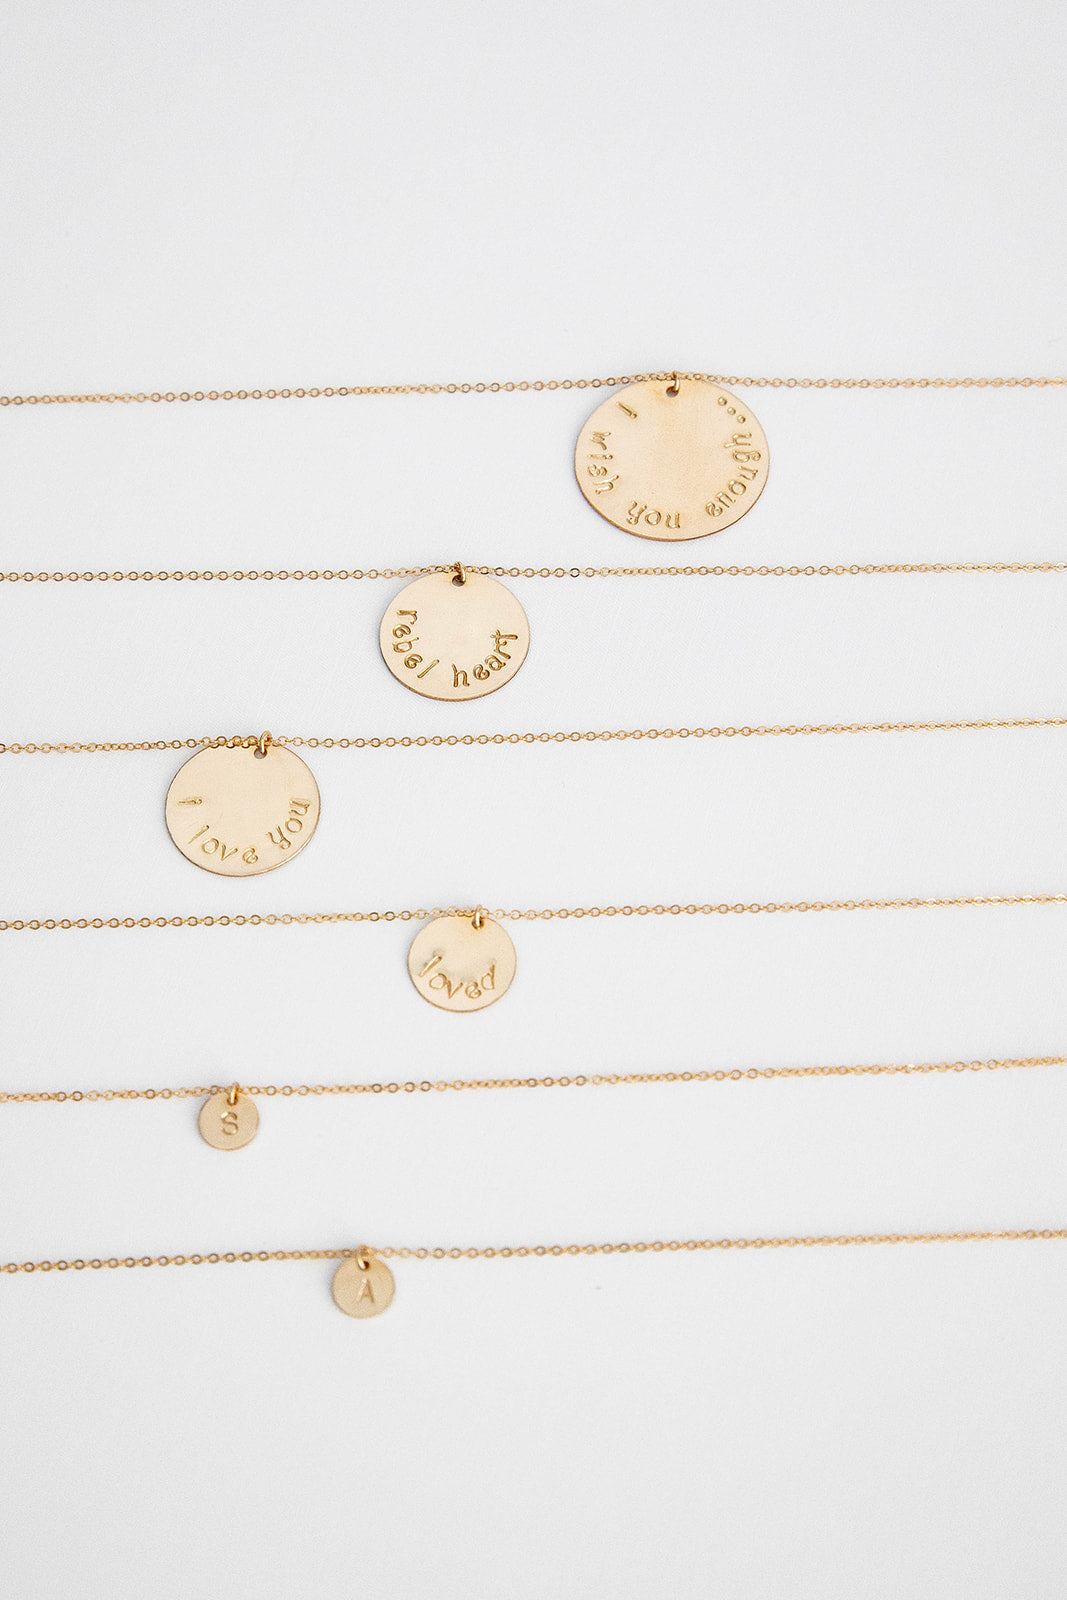 Six 14k gold filled chain necklaces with hand stamped 14k gold filled discs lay on a white background